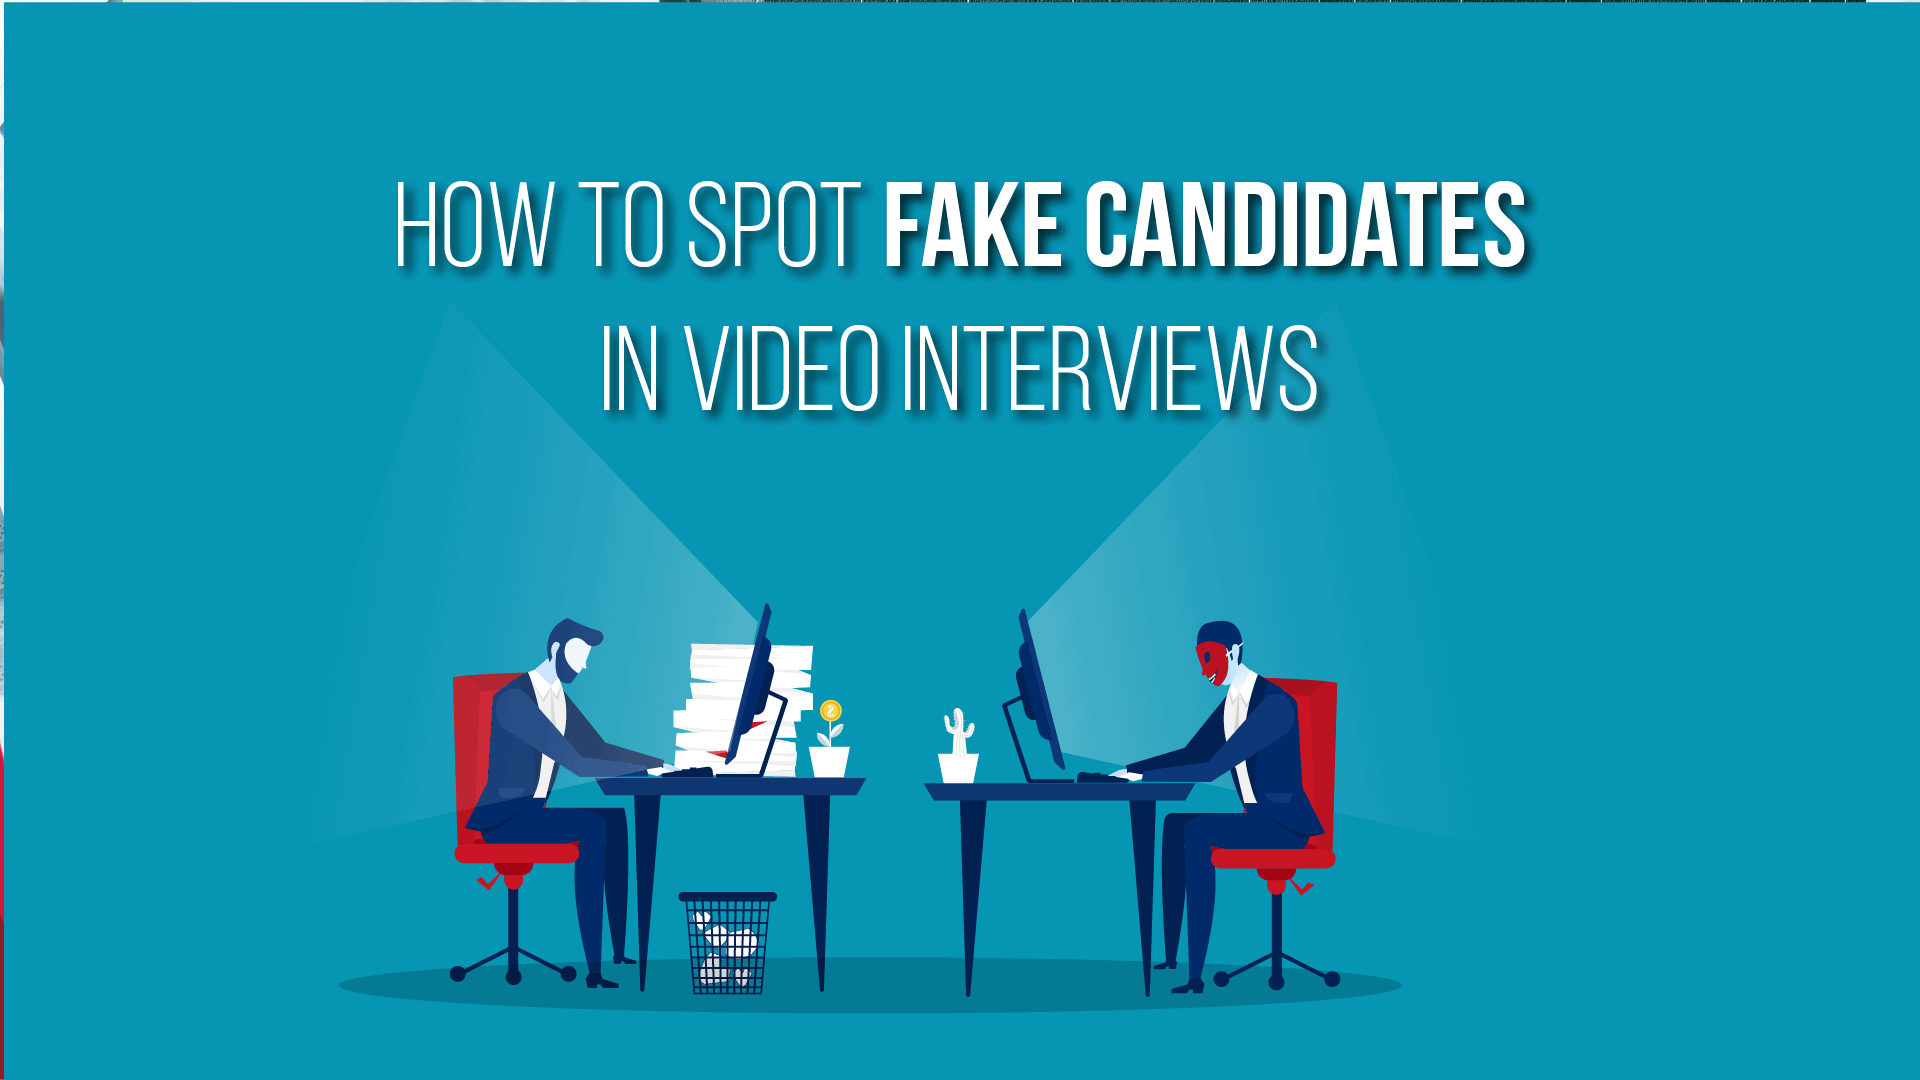 Proxy Interviews and Fake Meetings Rising as Fast as Videoconferencing